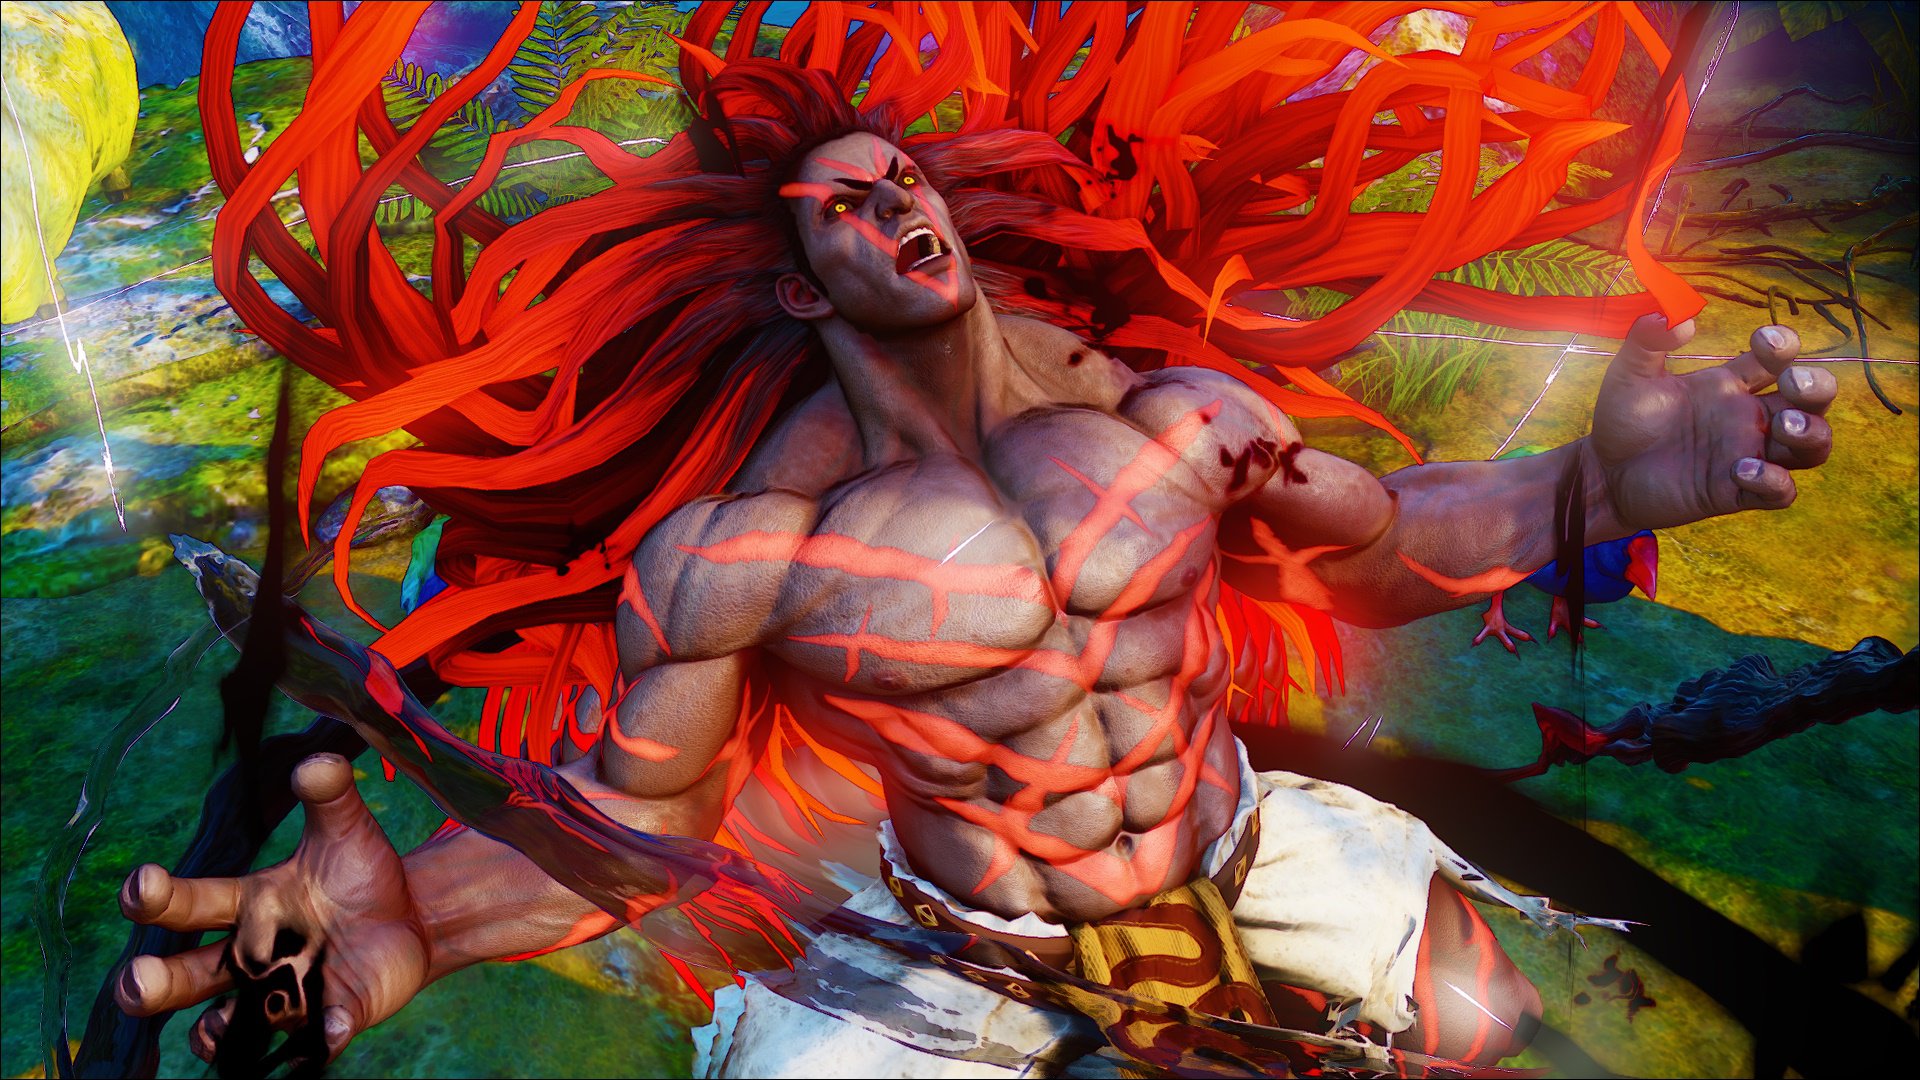 “Street Fighter V” Reveals New Character: Necalli - If Nariko from 